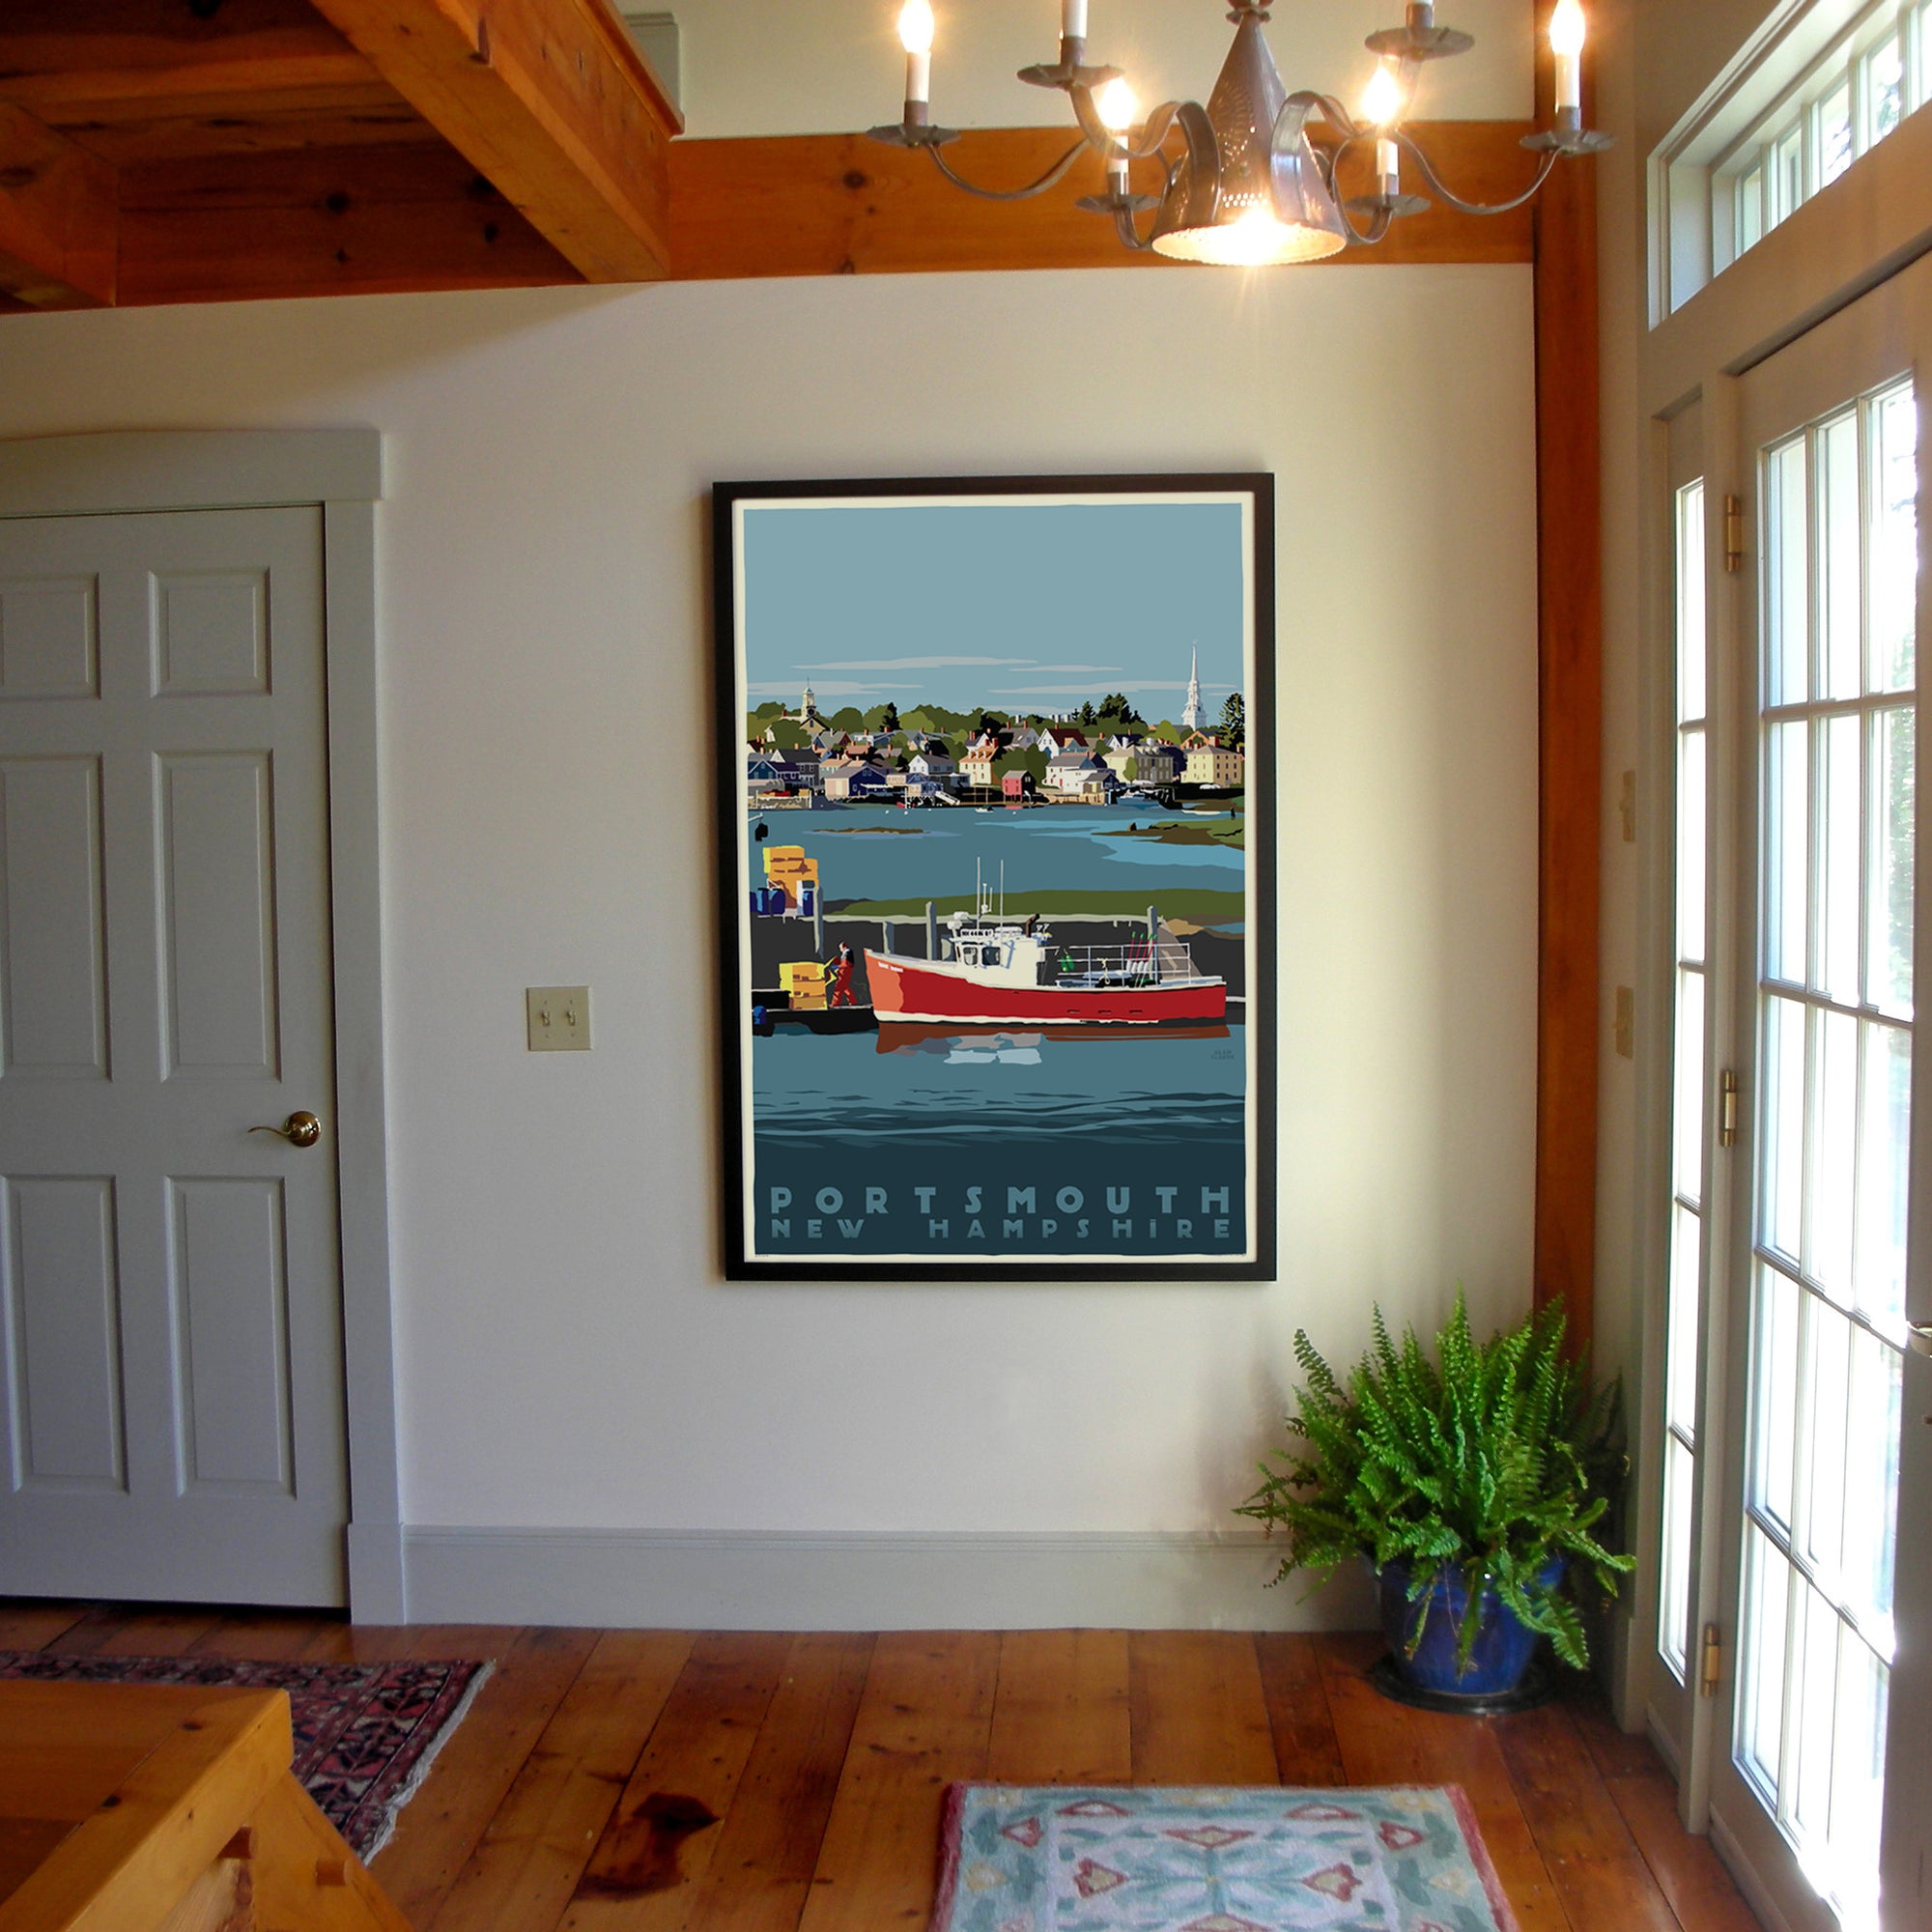 Portsmouth Lobster Boat Art Print 36" x 53" Framed Travel Poster By Alan Claude - New Hampshire